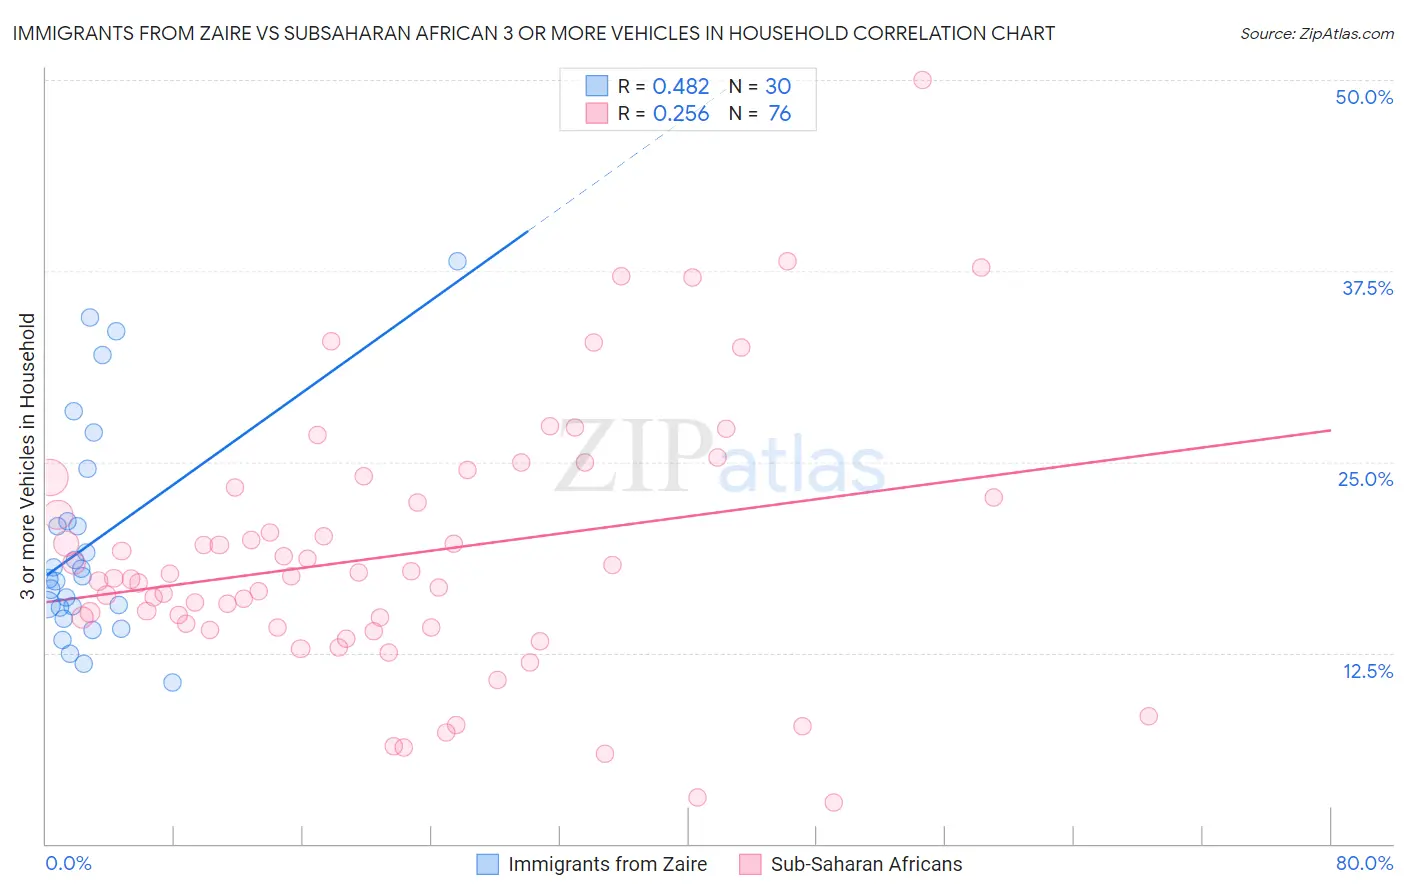 Immigrants from Zaire vs Subsaharan African 3 or more Vehicles in Household